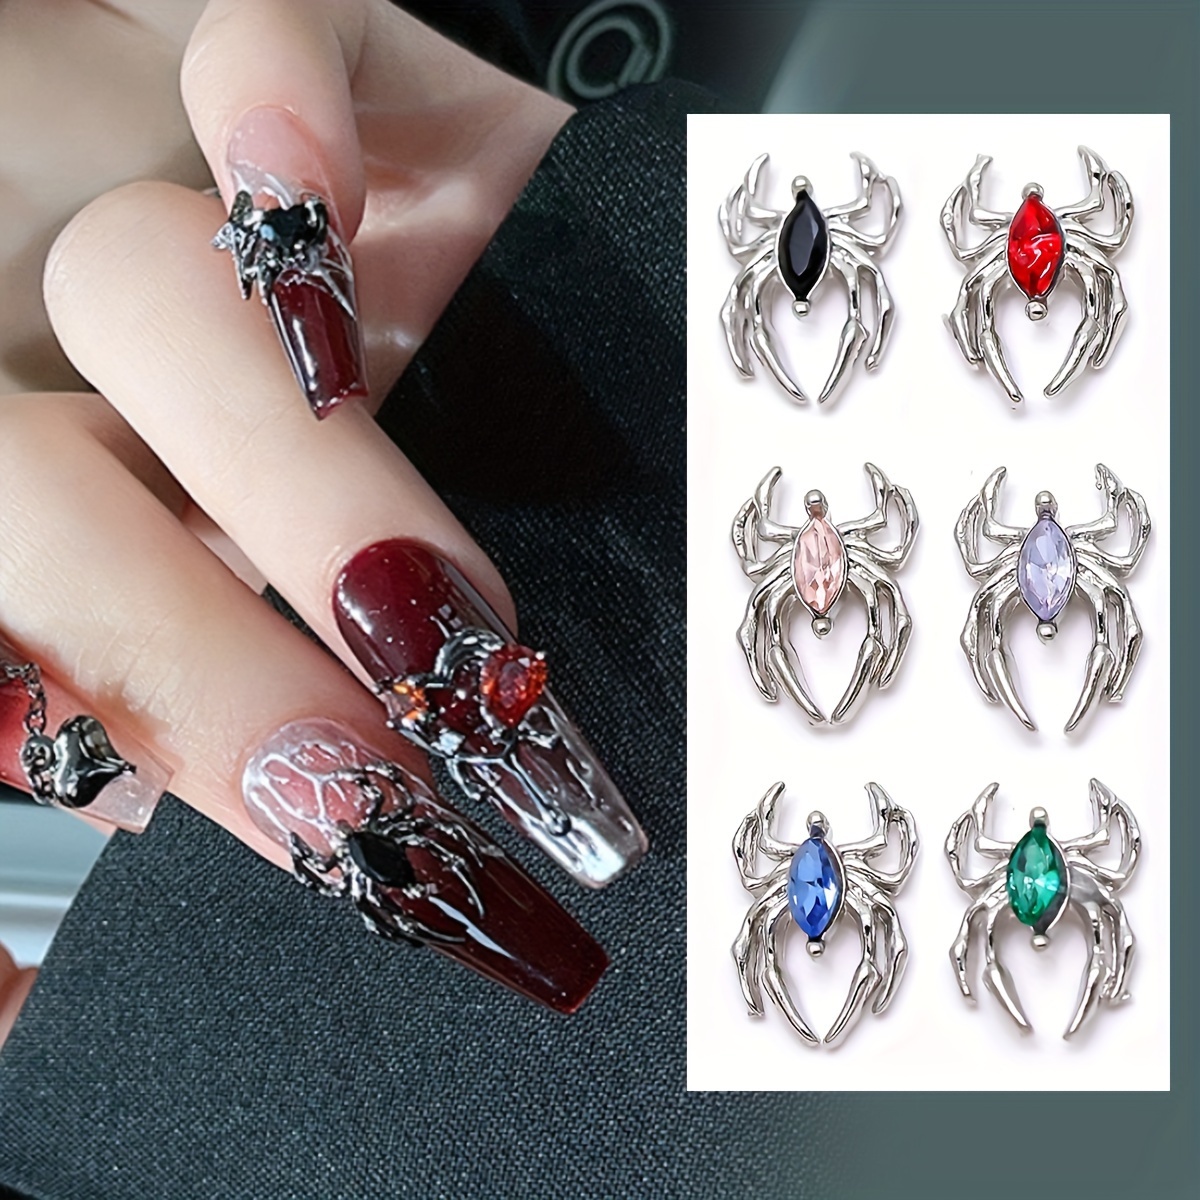 6pcs Halloween Spider Nail Art Charms With Rhinestone,3D Alloy Spider Nail  Gem Accessories For DIY Nail Art Decoration,Nail Art Jewelry For Girls Nail